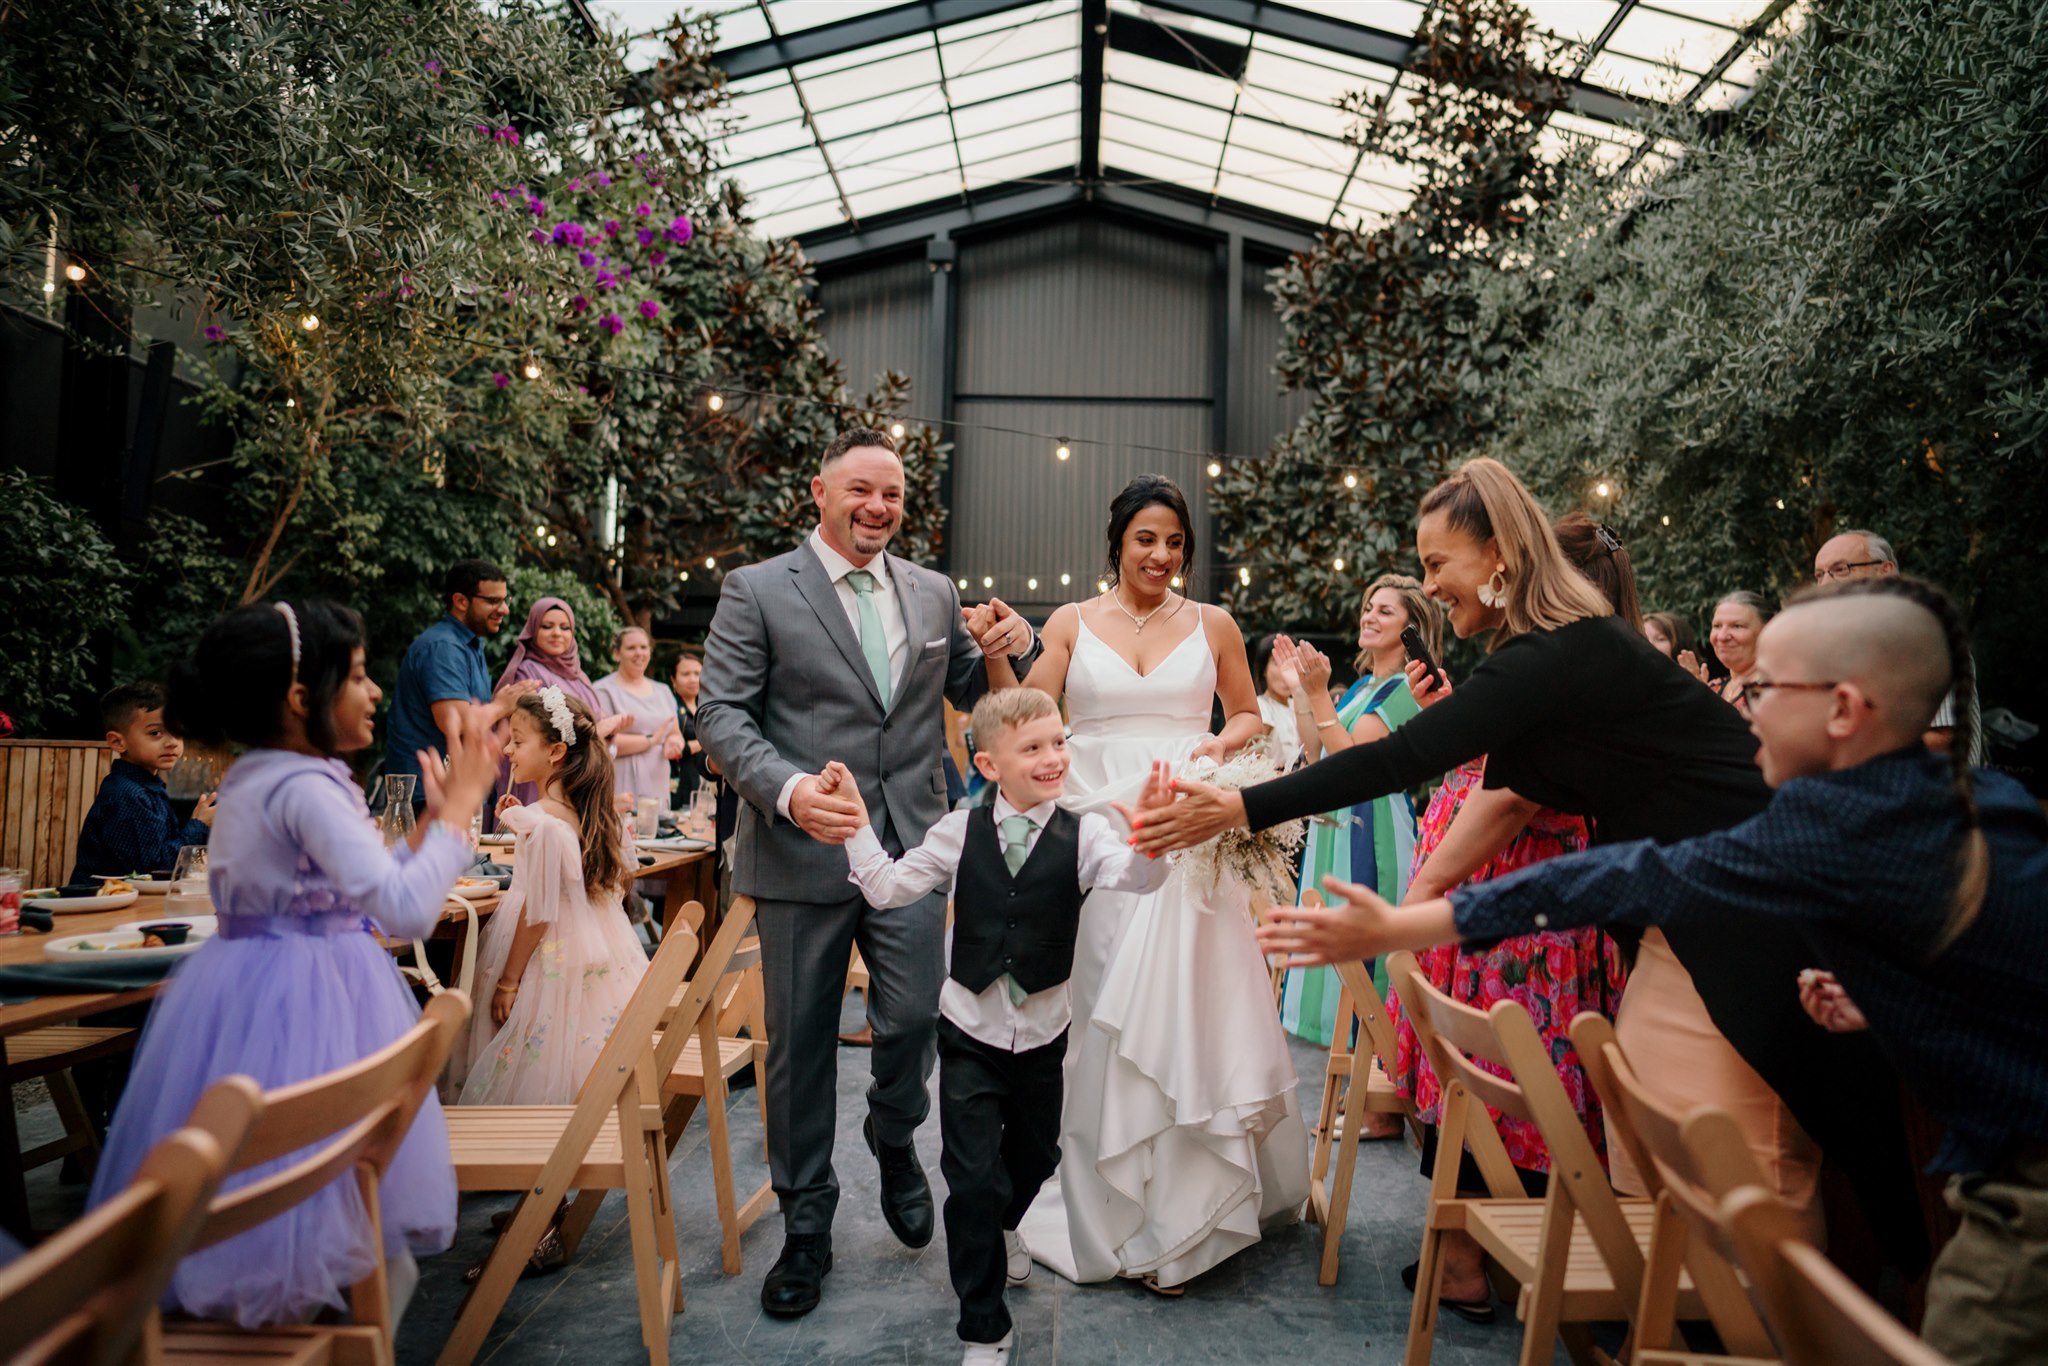 glasshouse-morningside-top-auckland-wedding-phtographer-photography-videography-film-new-zealand-NZ-best-urban-venue-stylish-intimate-central-ceremony-reception-dear-white-productions (11).jpg